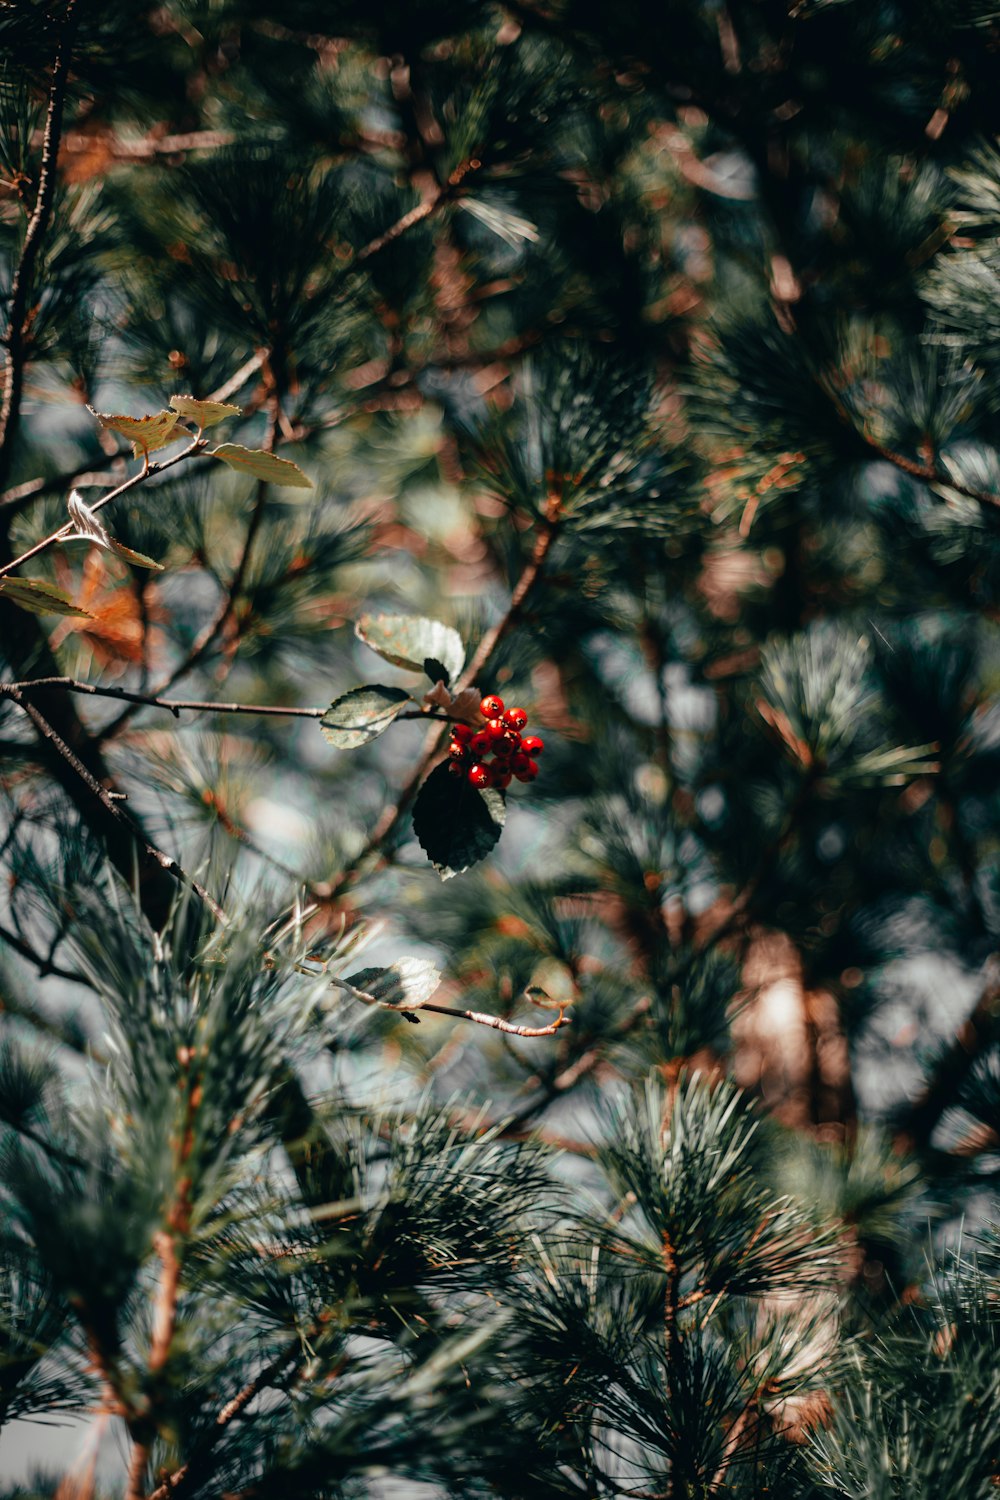 a red berry on a branch of a pine tree